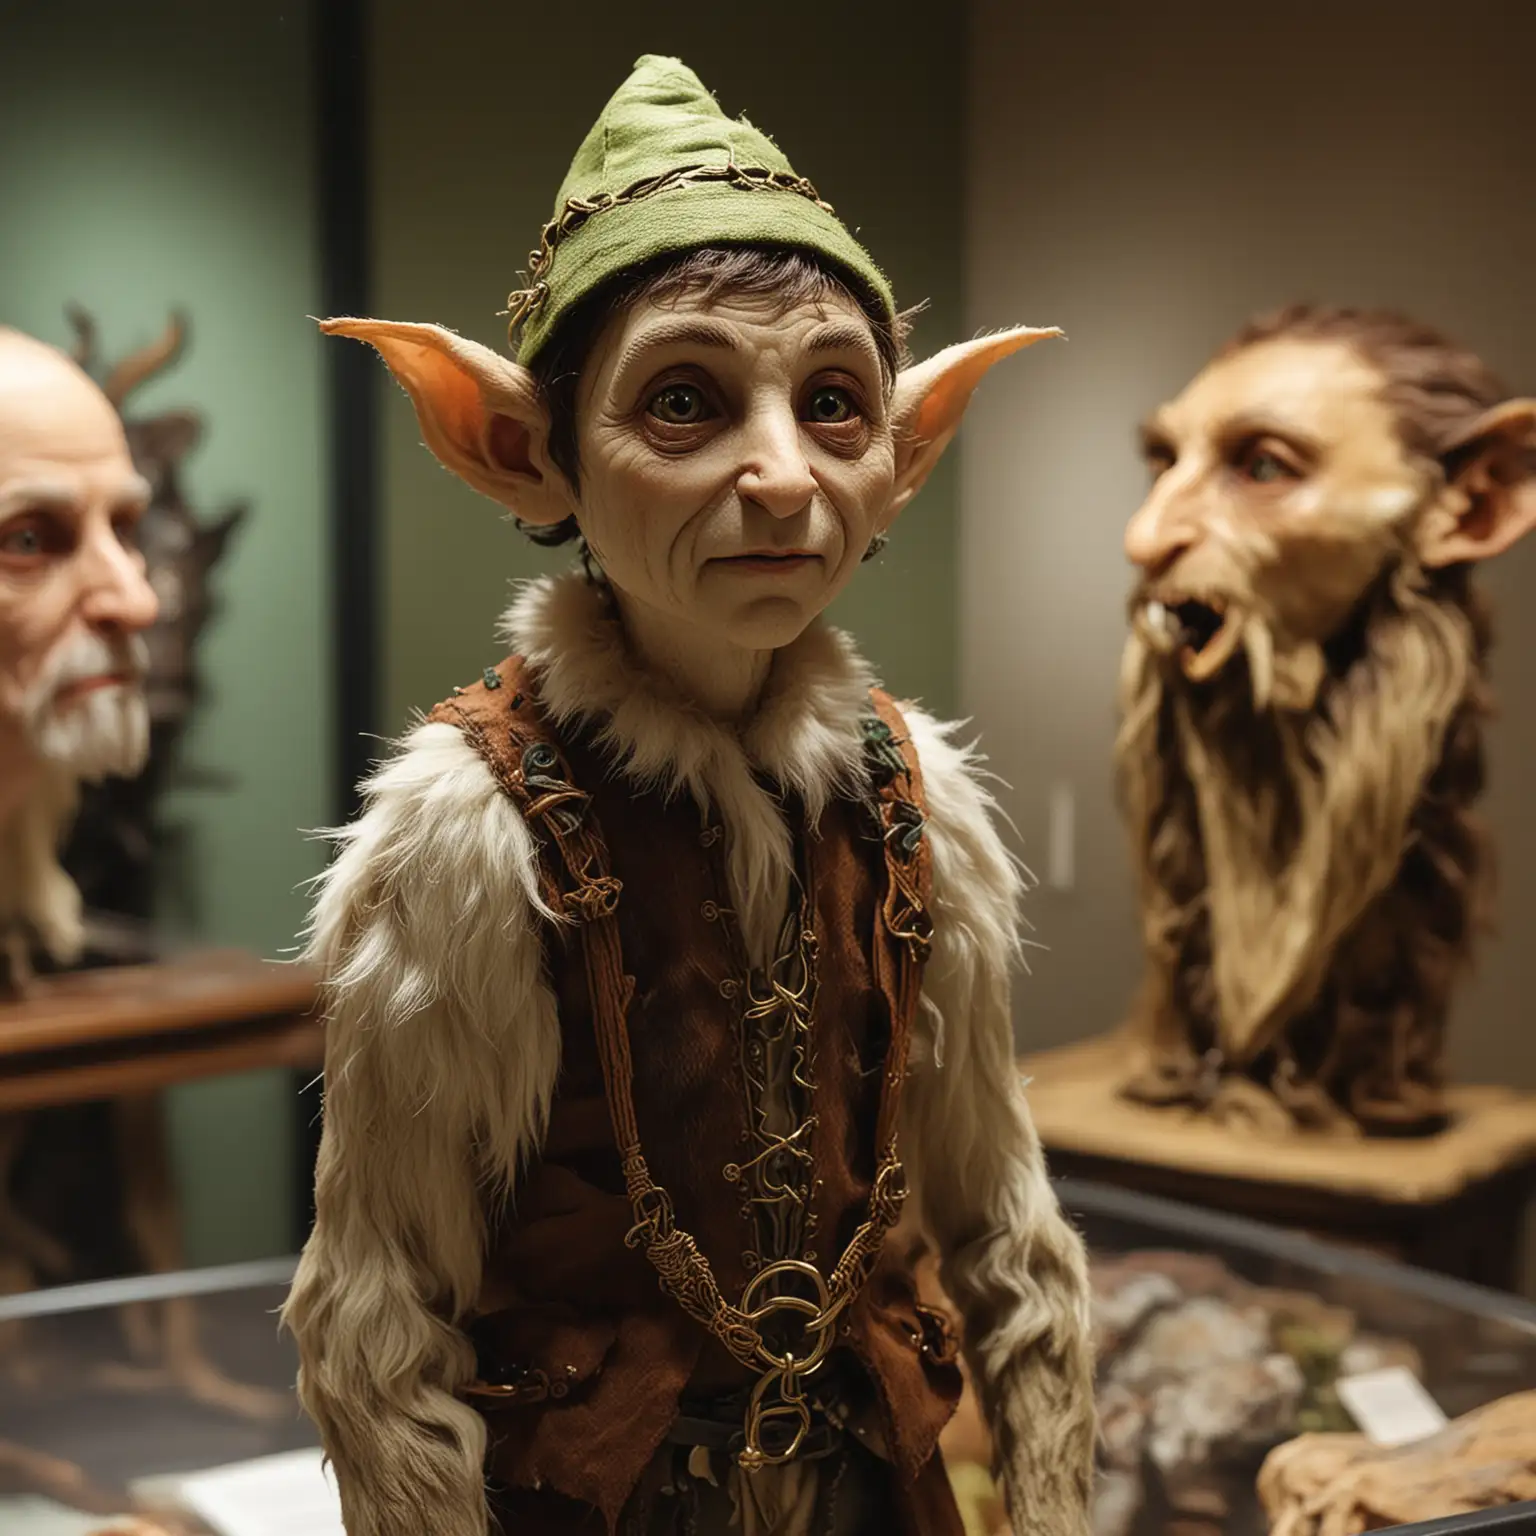 A taxidermied elf stuffed and monted in the Museum of Mythical Creatures

